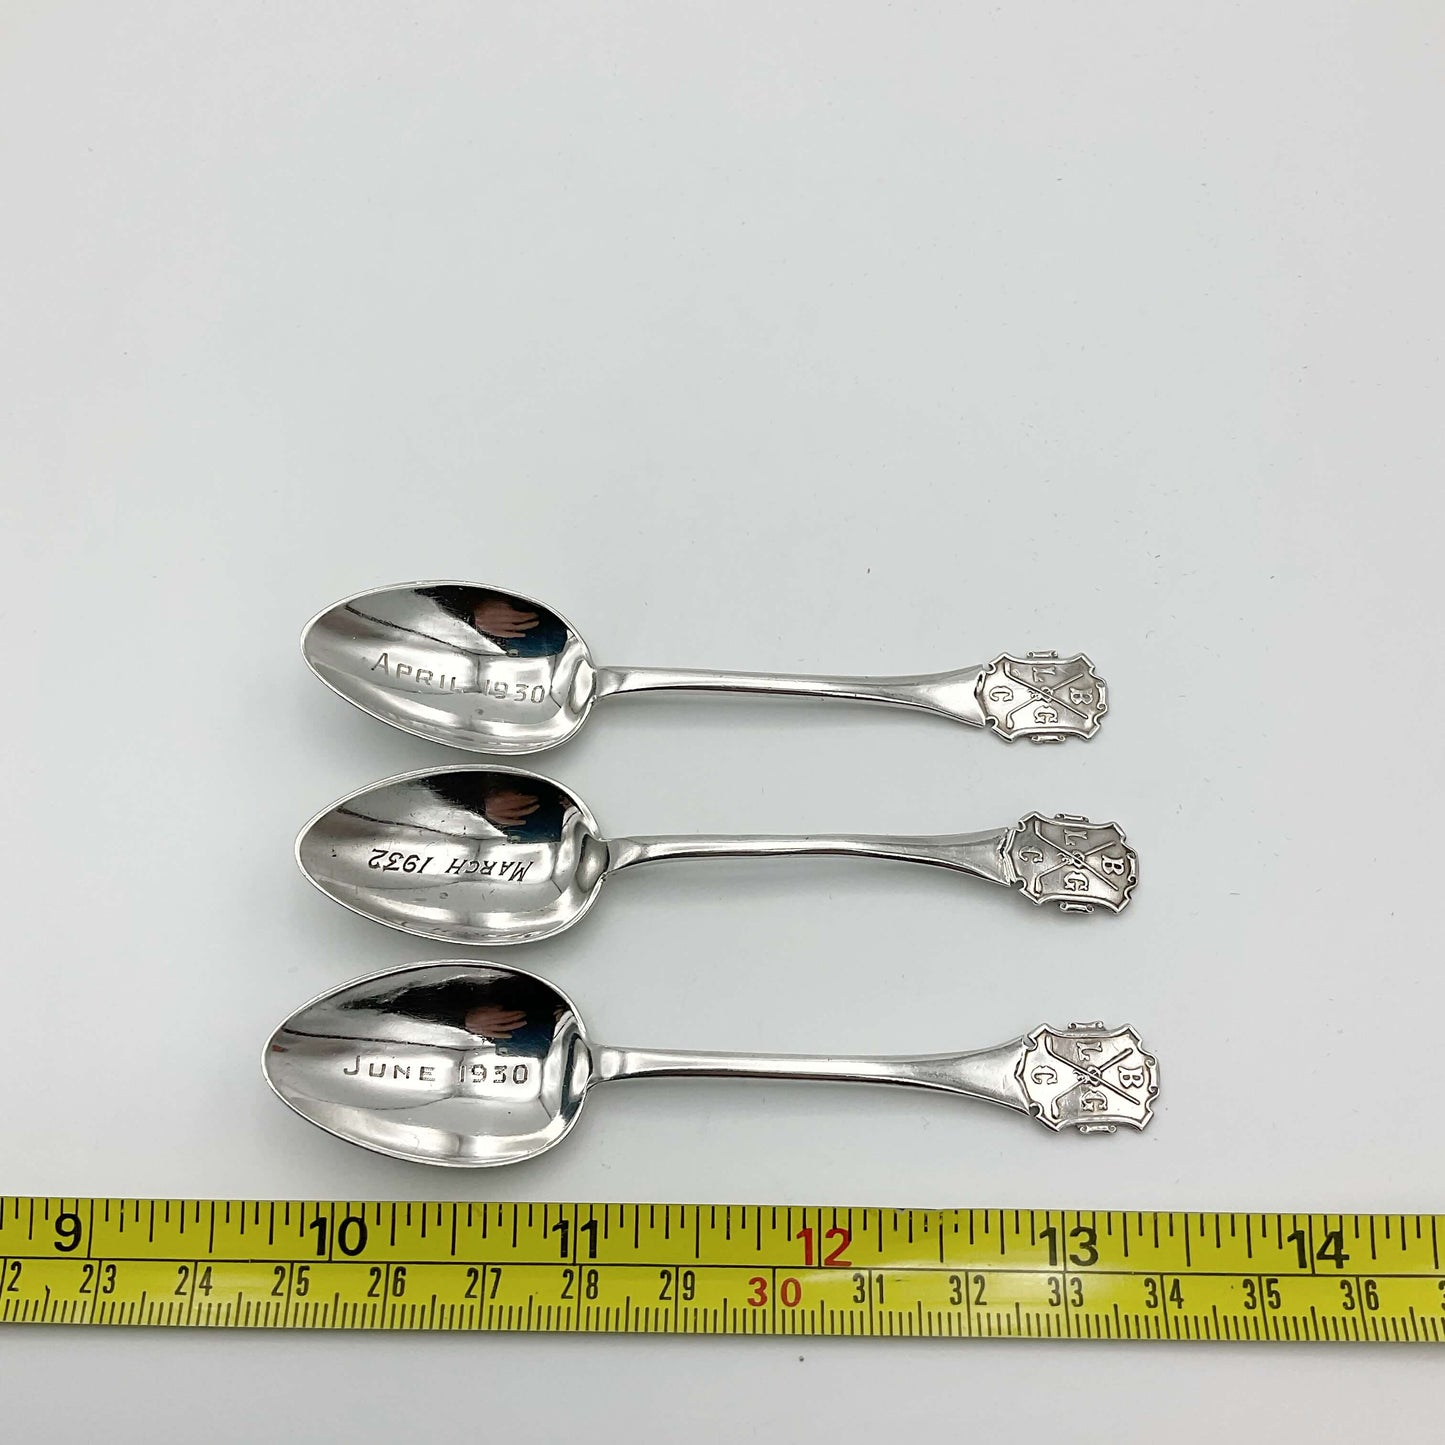 Three vintage silver coffee spoons next to a tape measure showing the length as 9.6cm